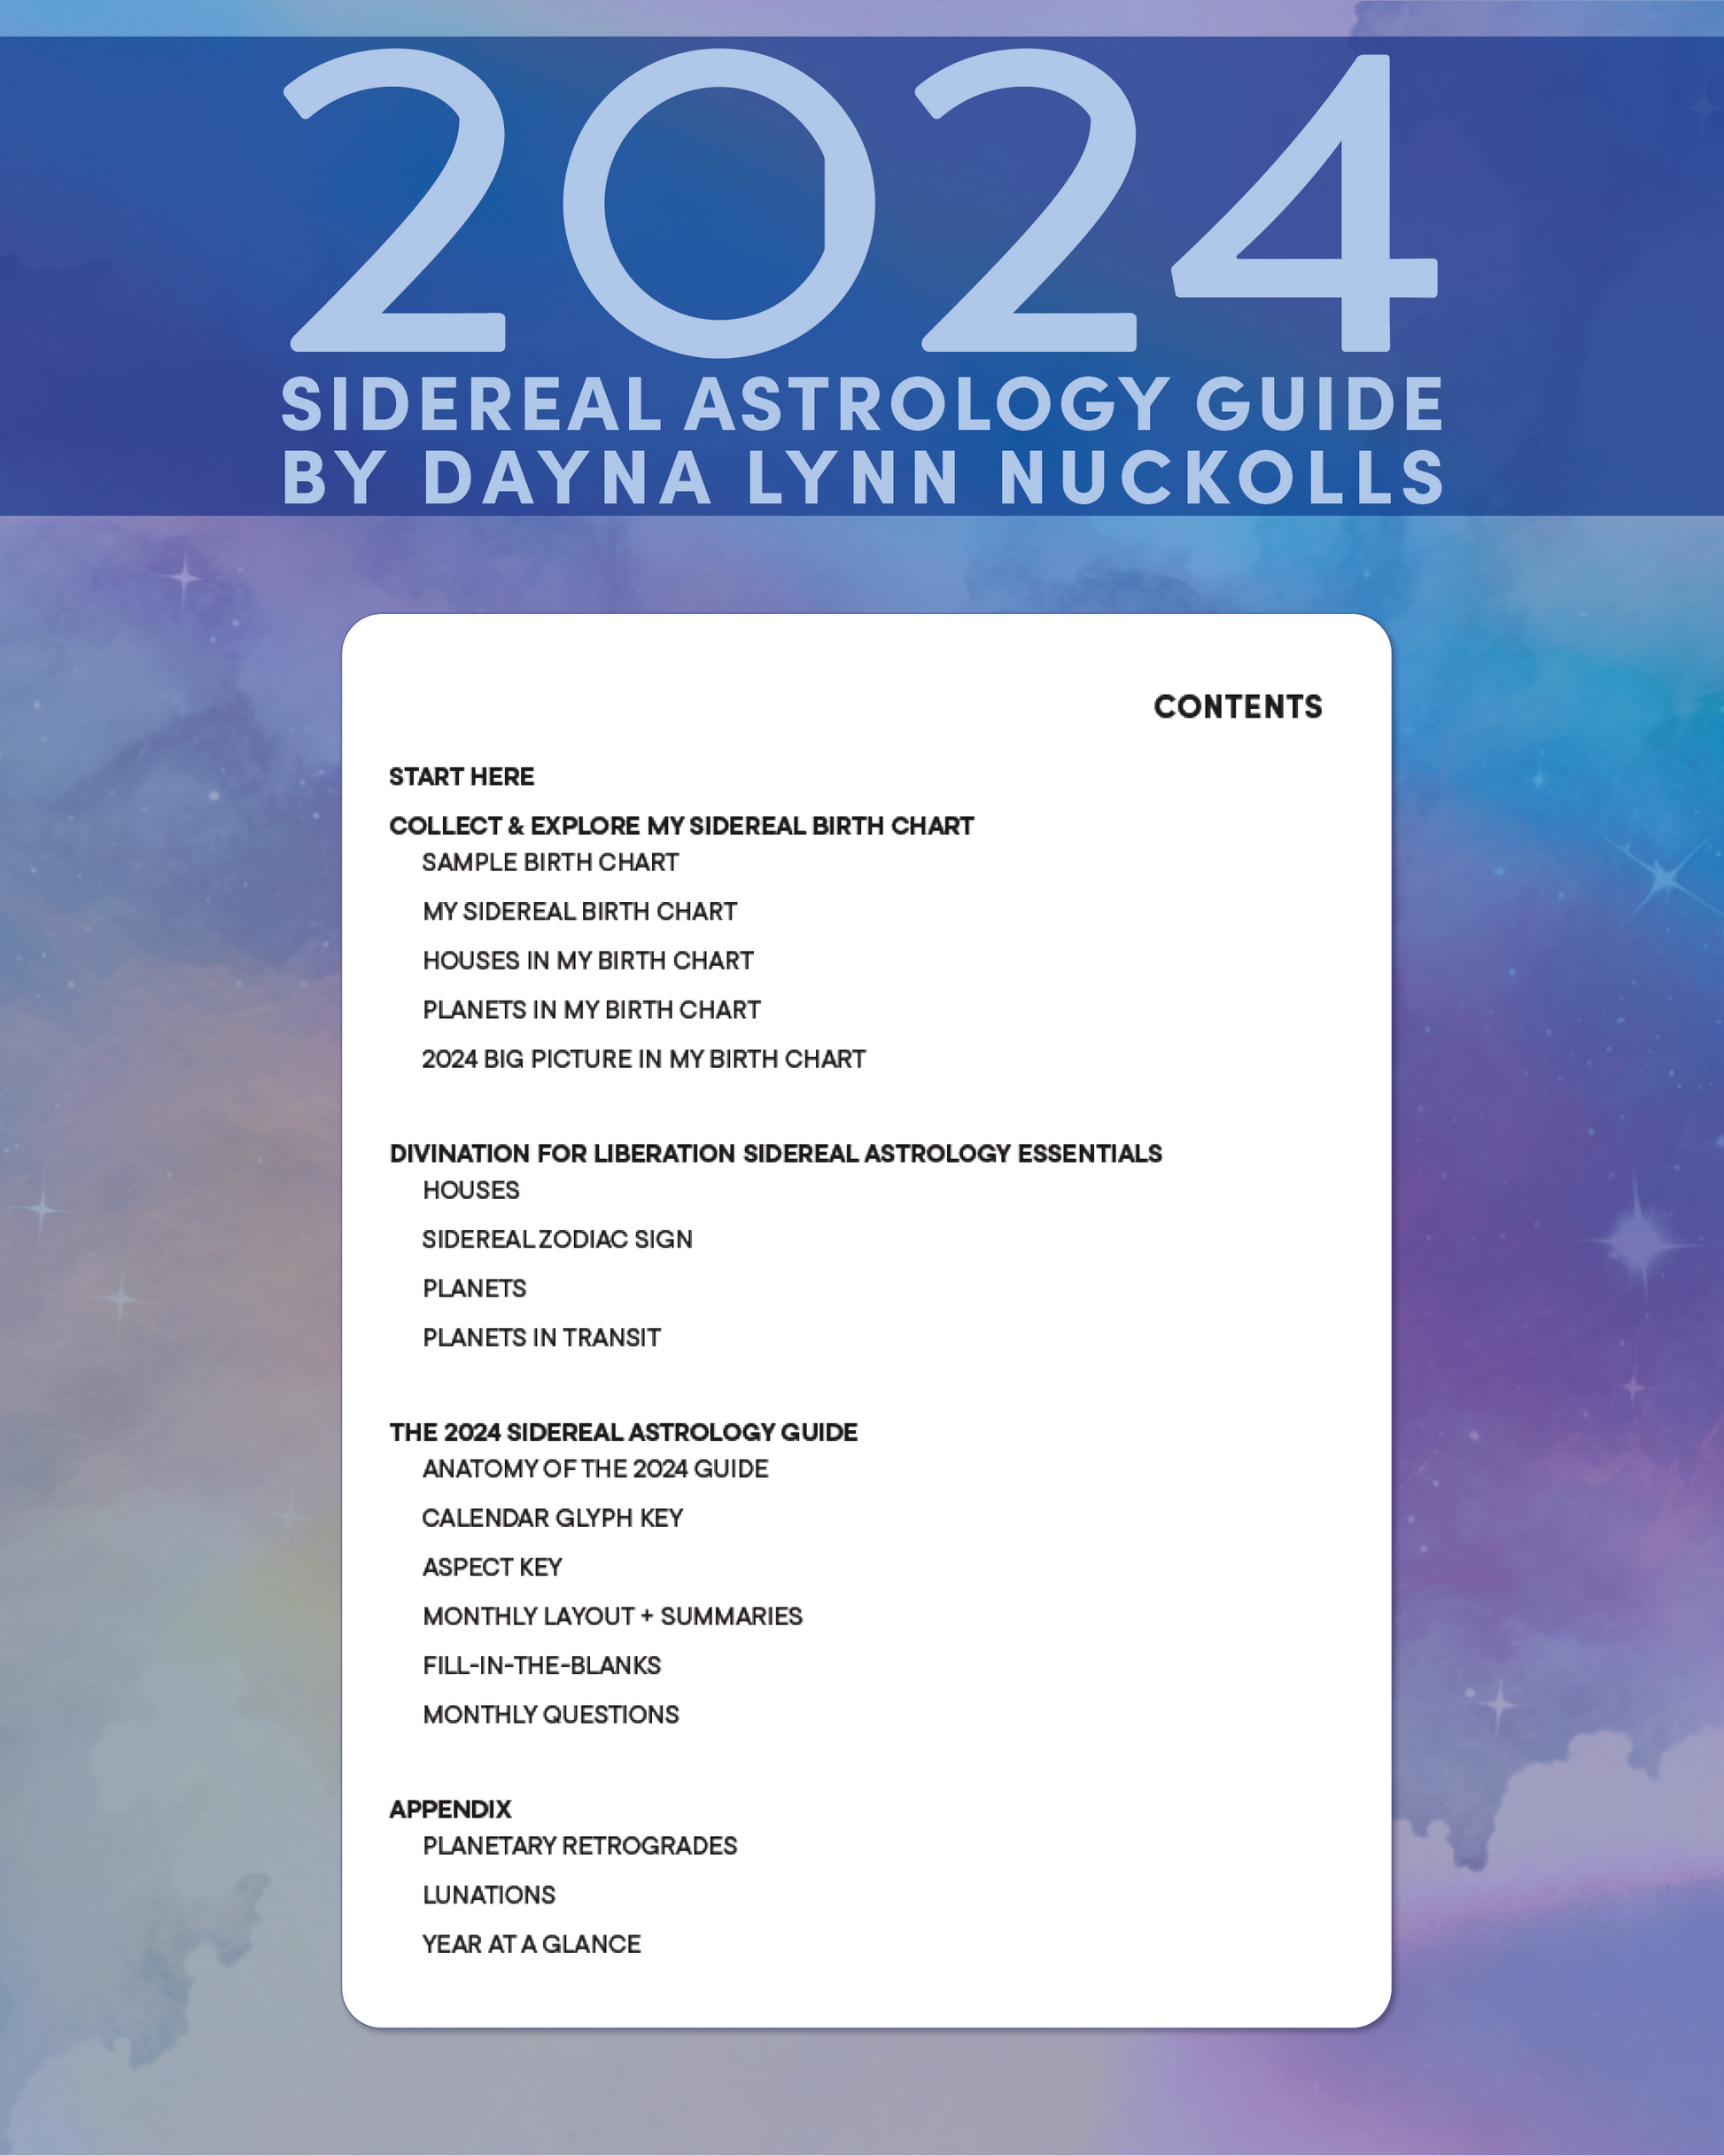 Contents of the 2024 sidereal astrology calendar called the 2024 Sidereal Astrology Guide. Collect & Explore My Sidereal Birth Chart; Divination For Liberation Sidereal Astrology Essentials; The 2024 Sidereal Astrology Guide; Appendix.